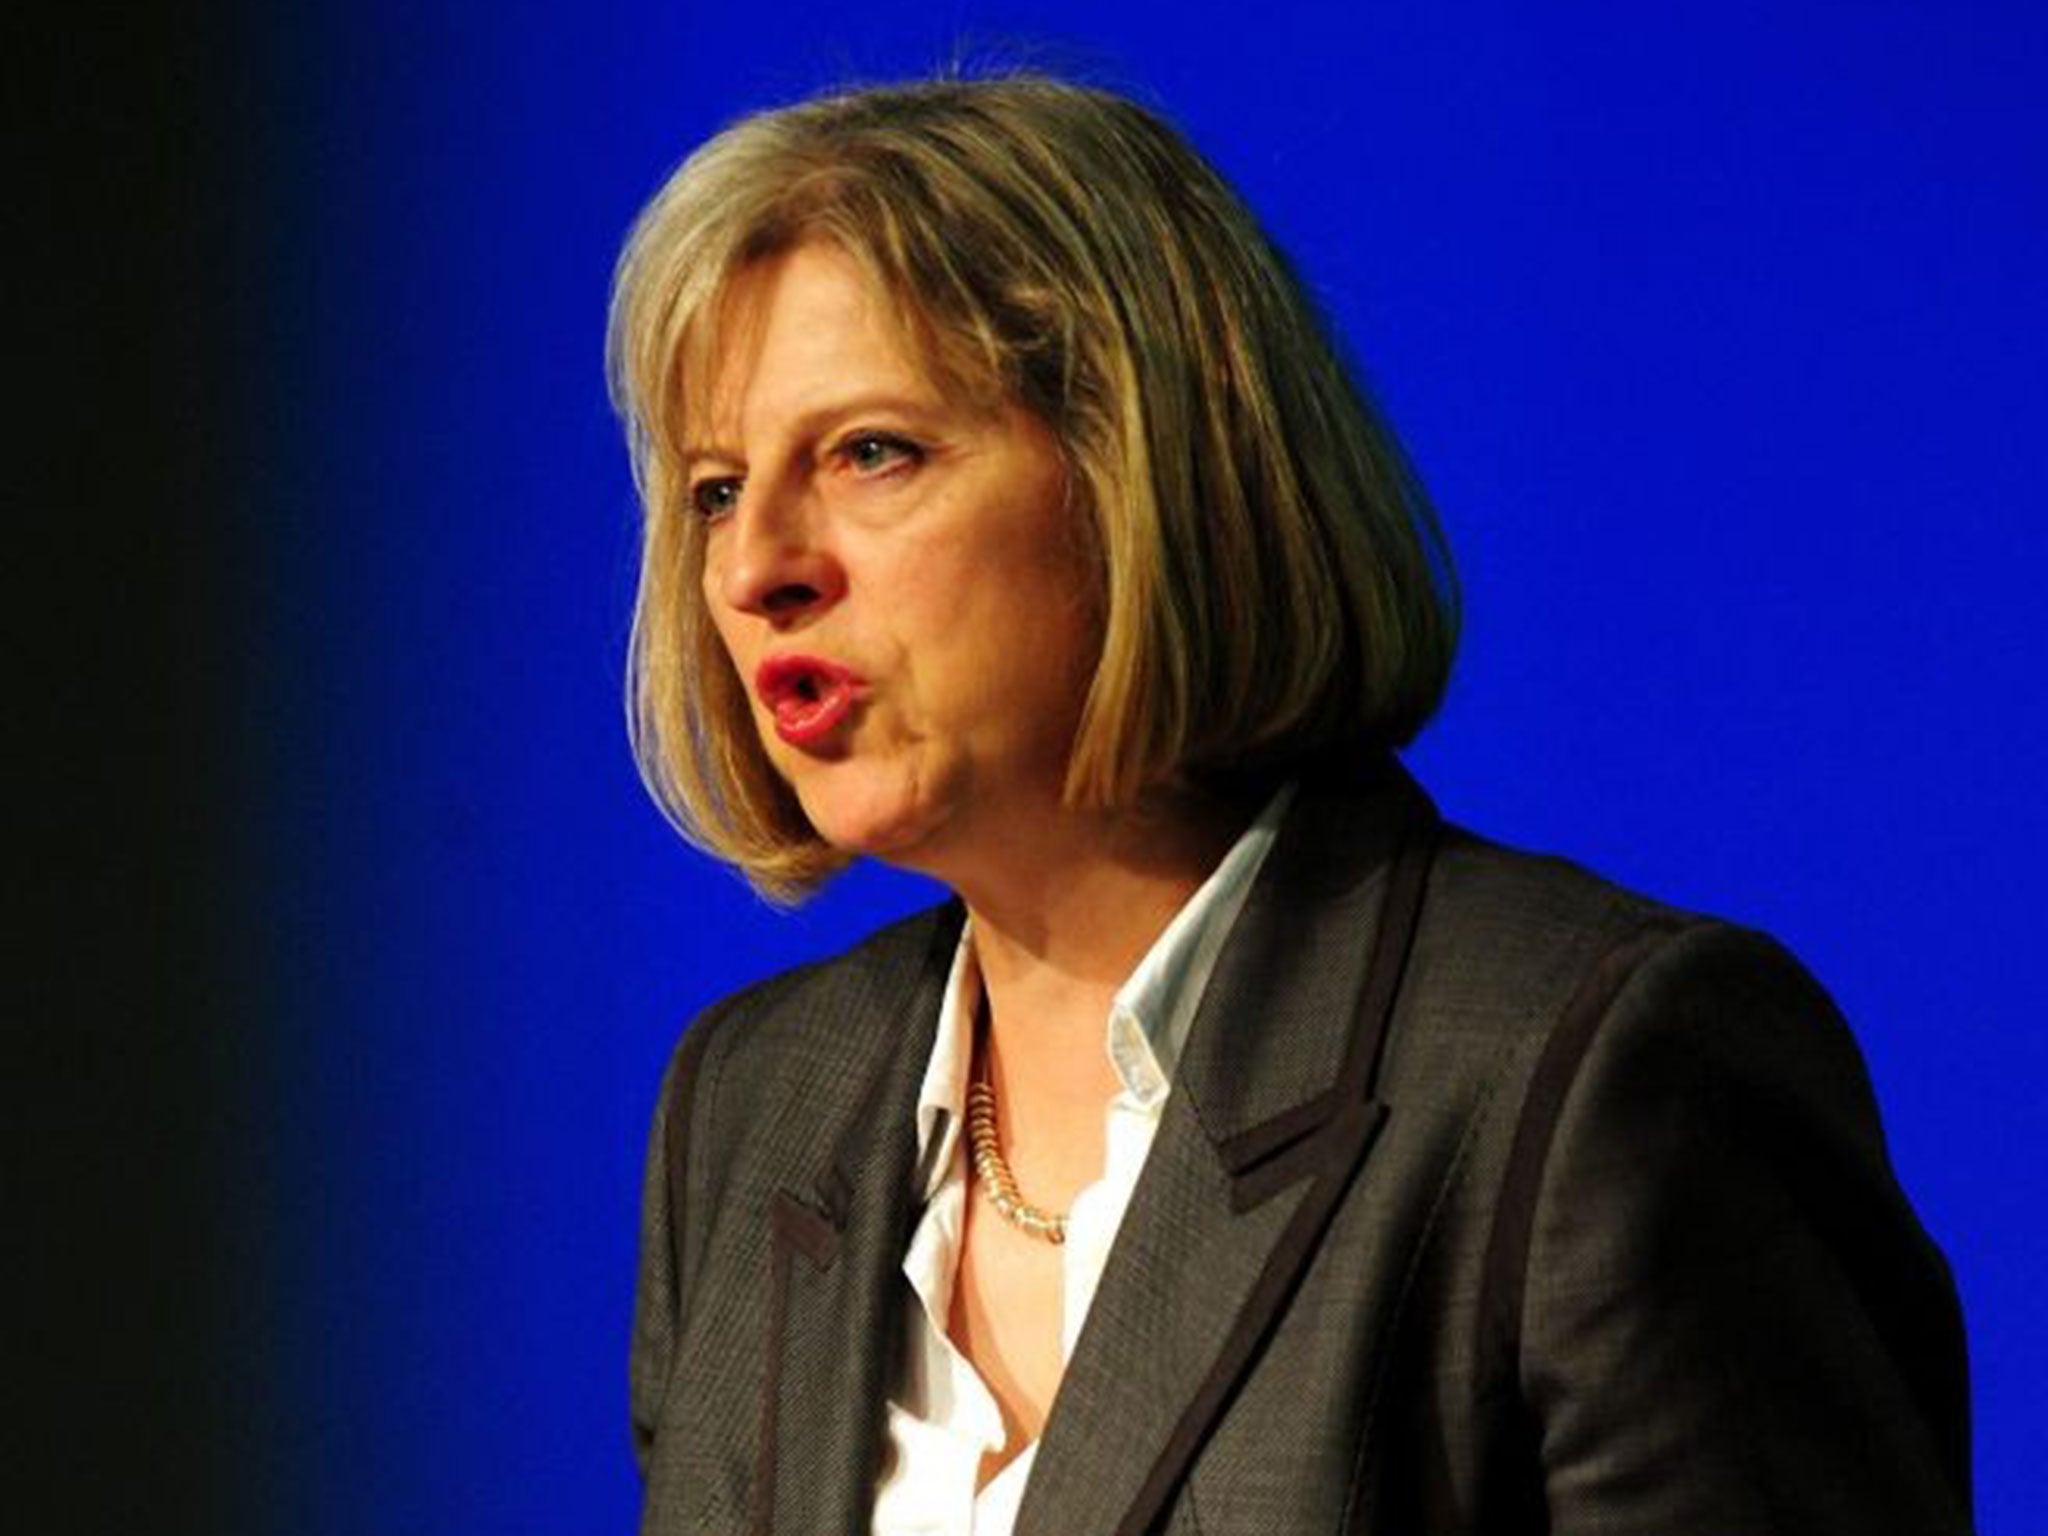 Theresa May will make her statement amid growing calls for a public inquiry